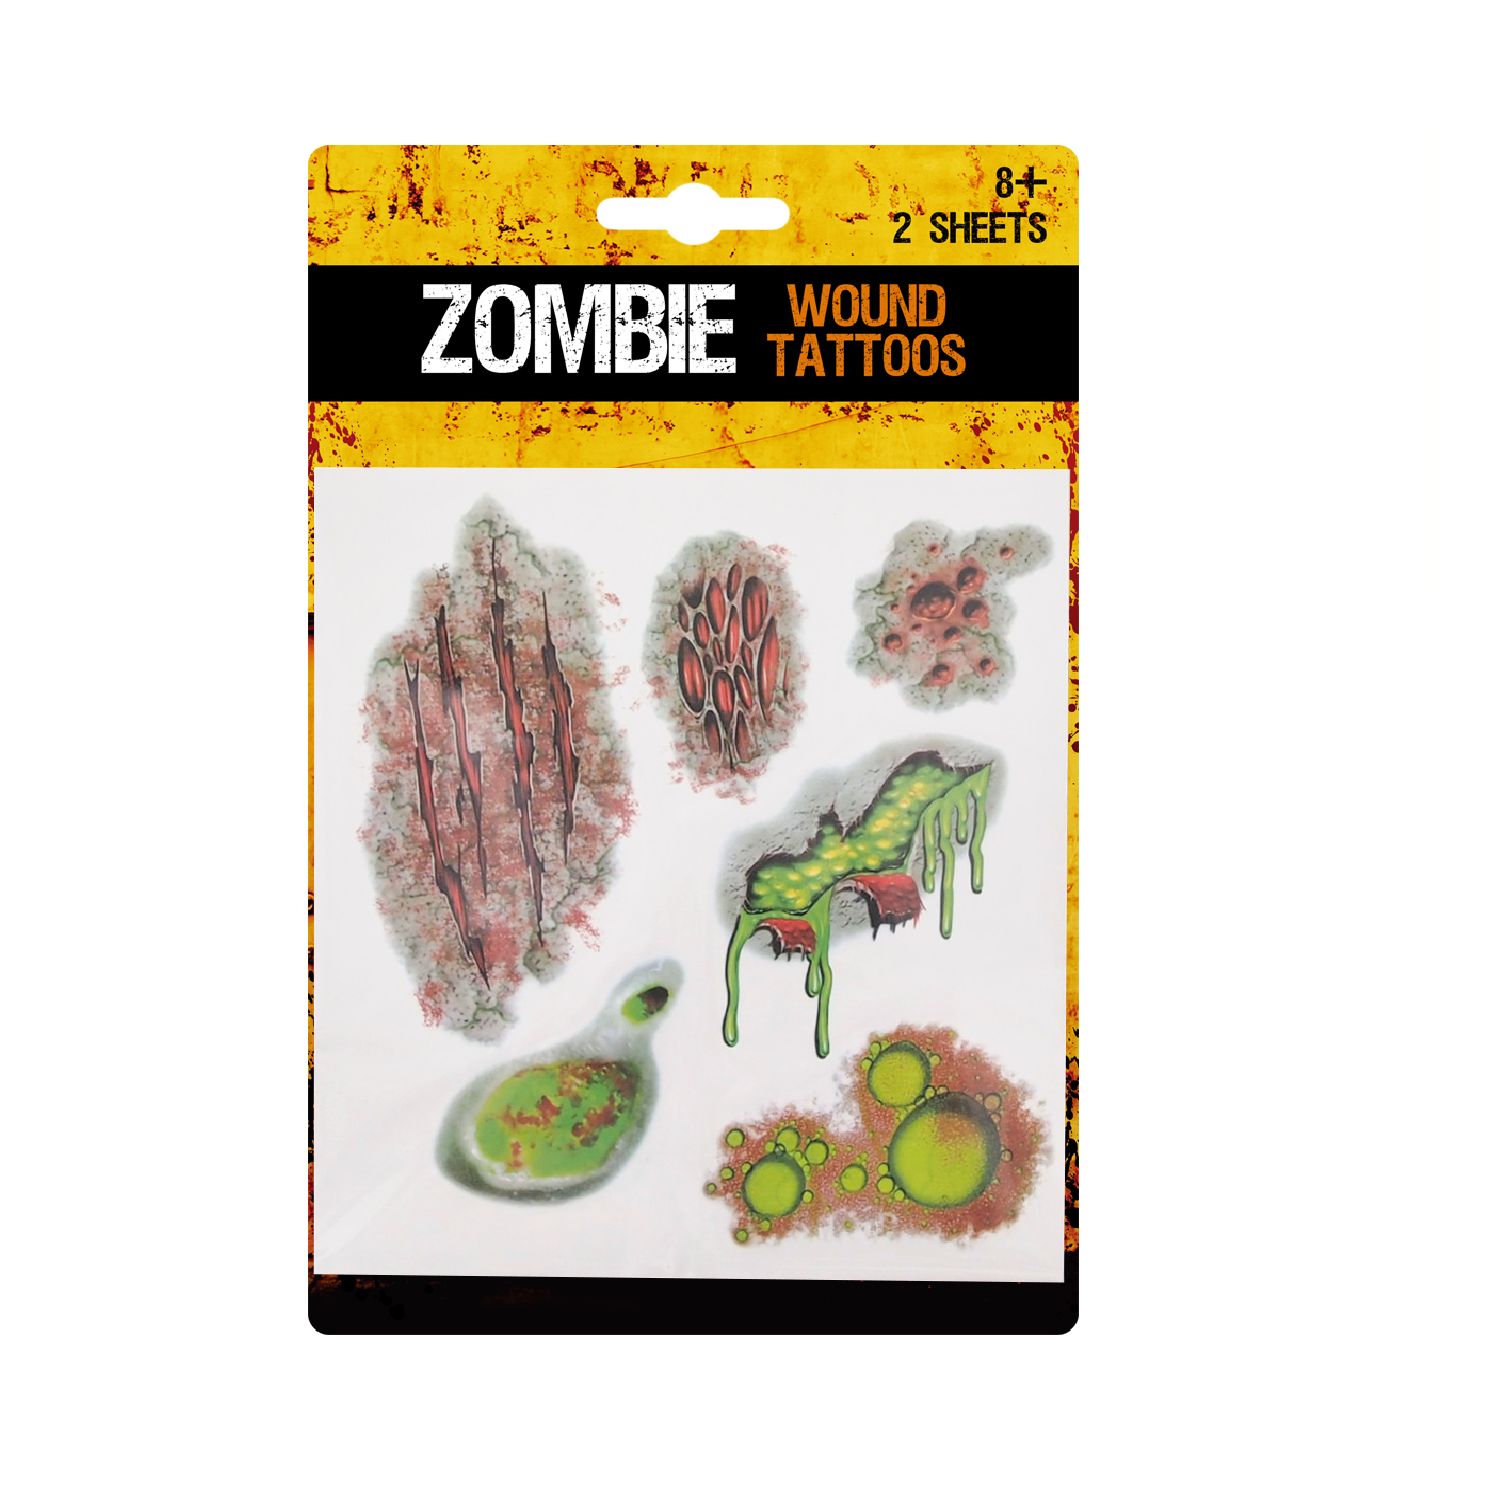 ZOMBIE WOUND TATTOO 2 SHEETS